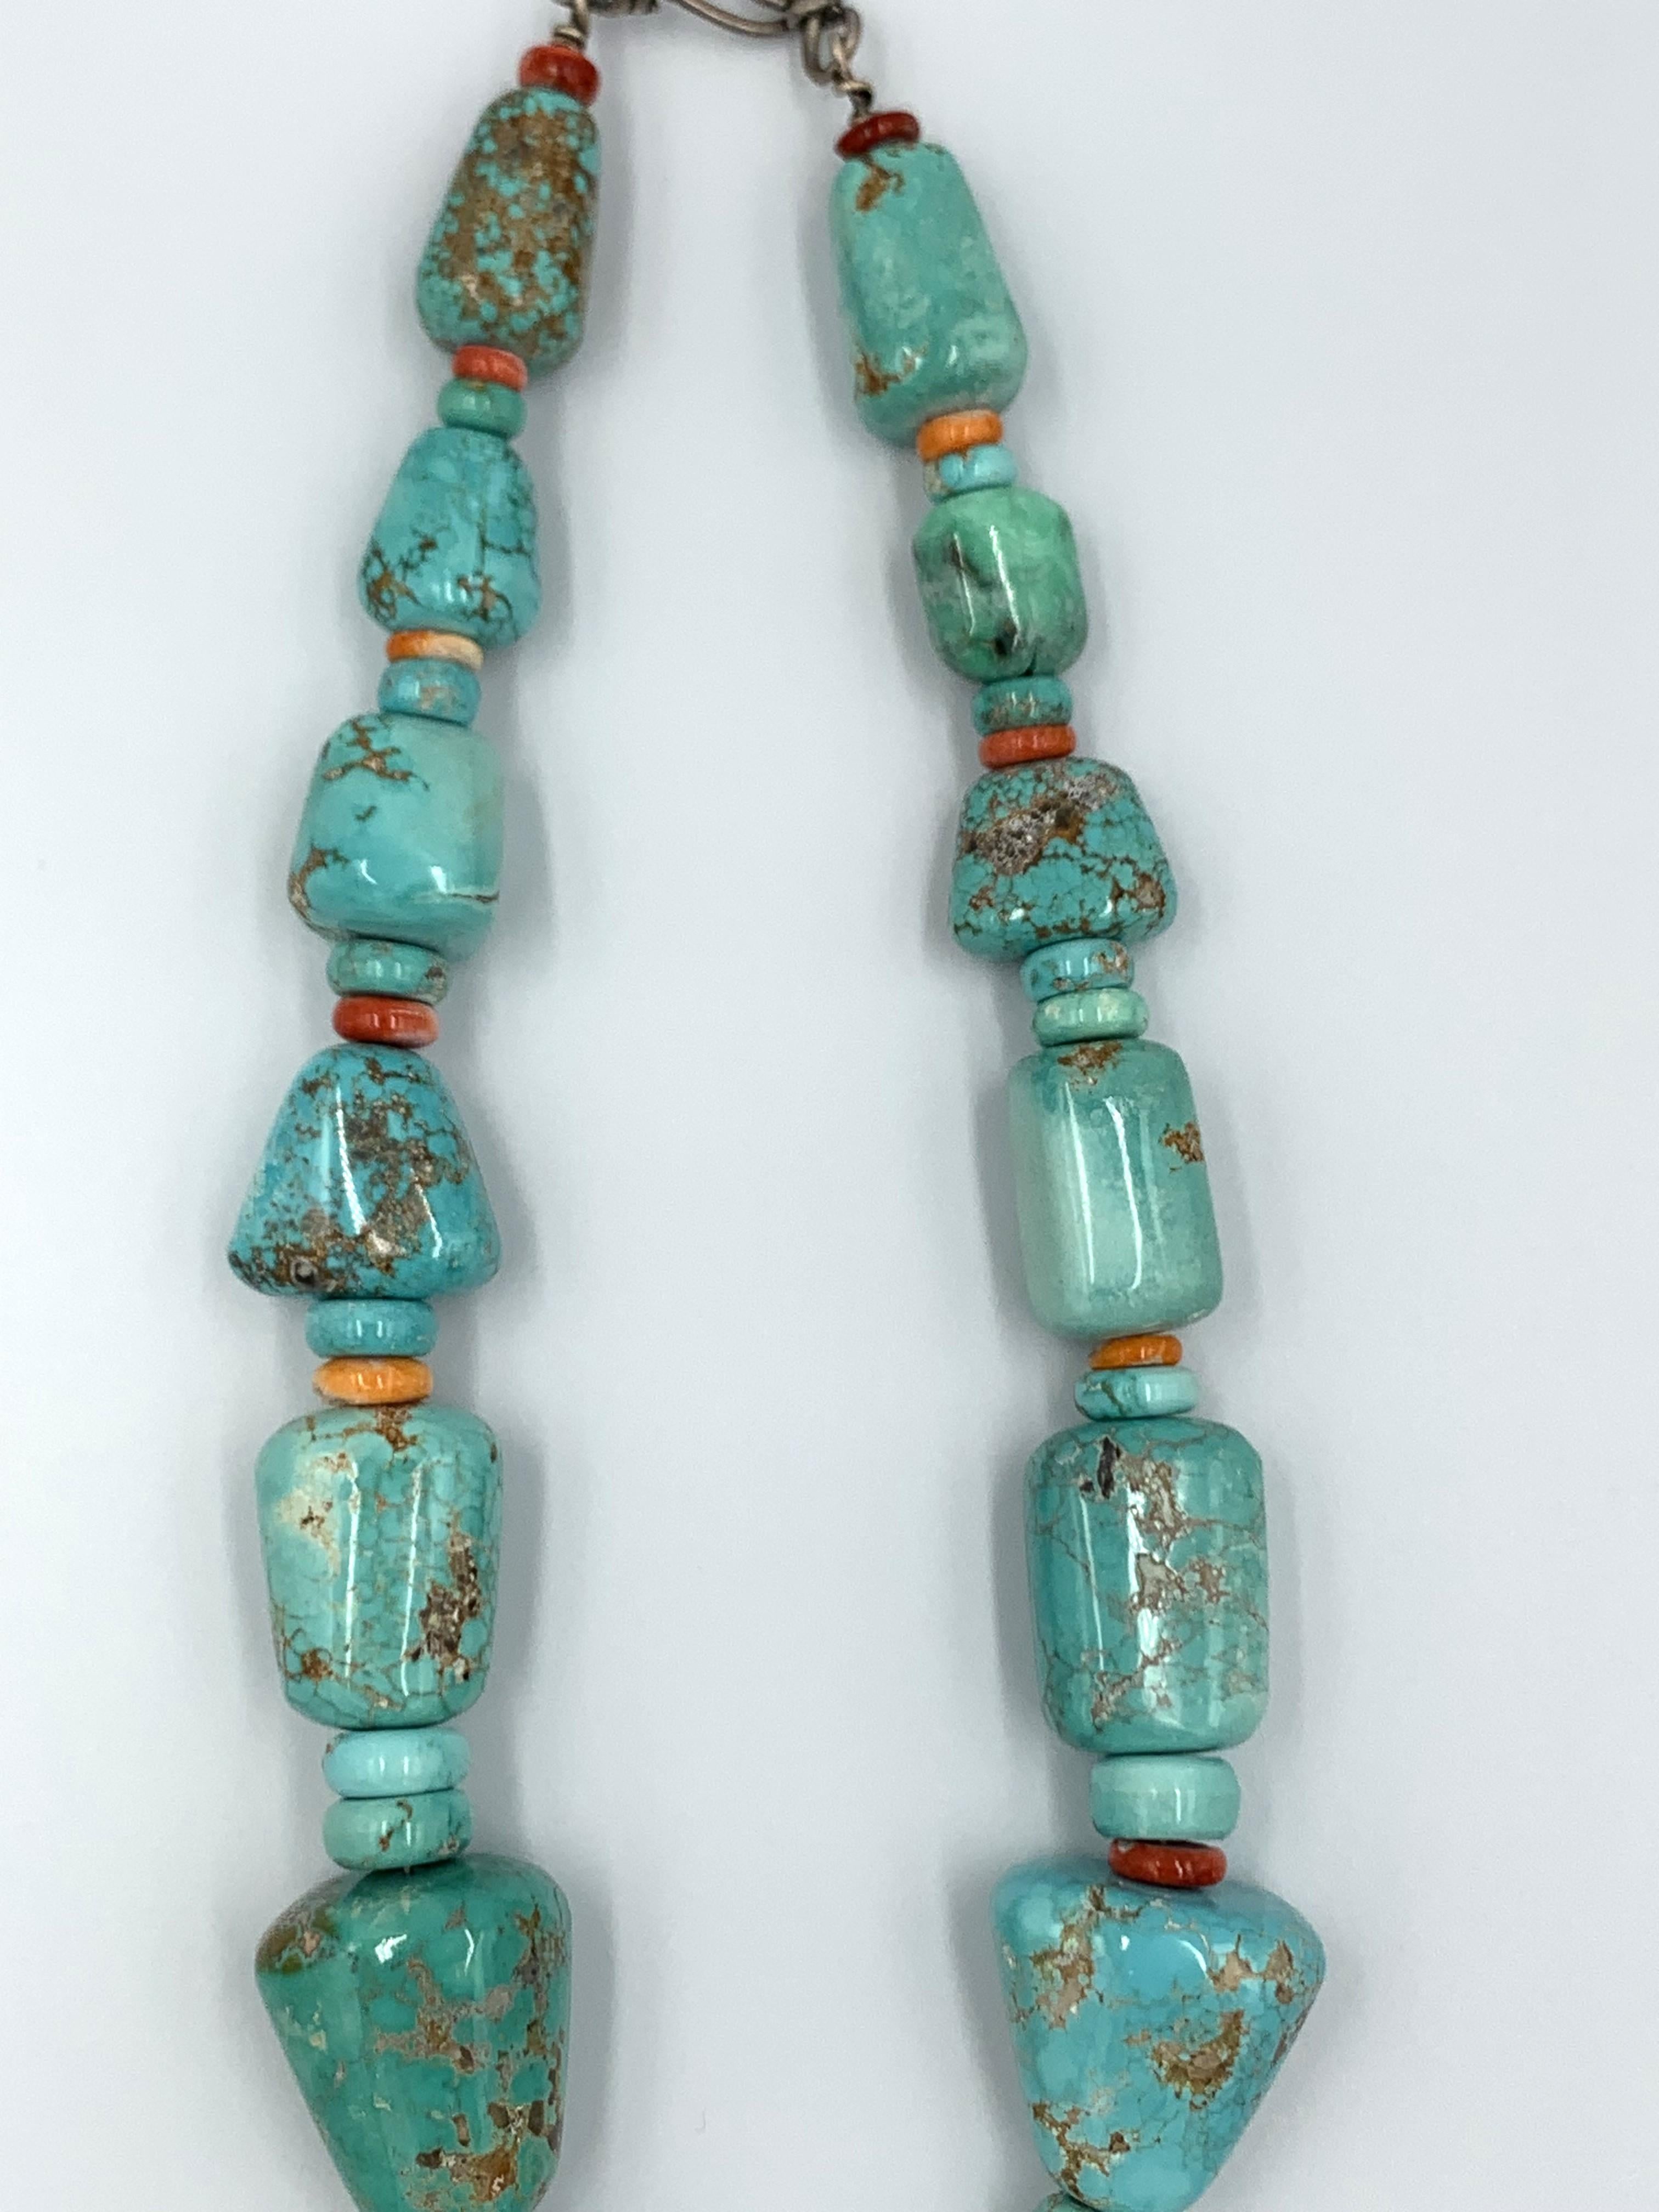 Carico Lake Turquoise Bead Necklace by Bruce Eckhardt For Sale 9